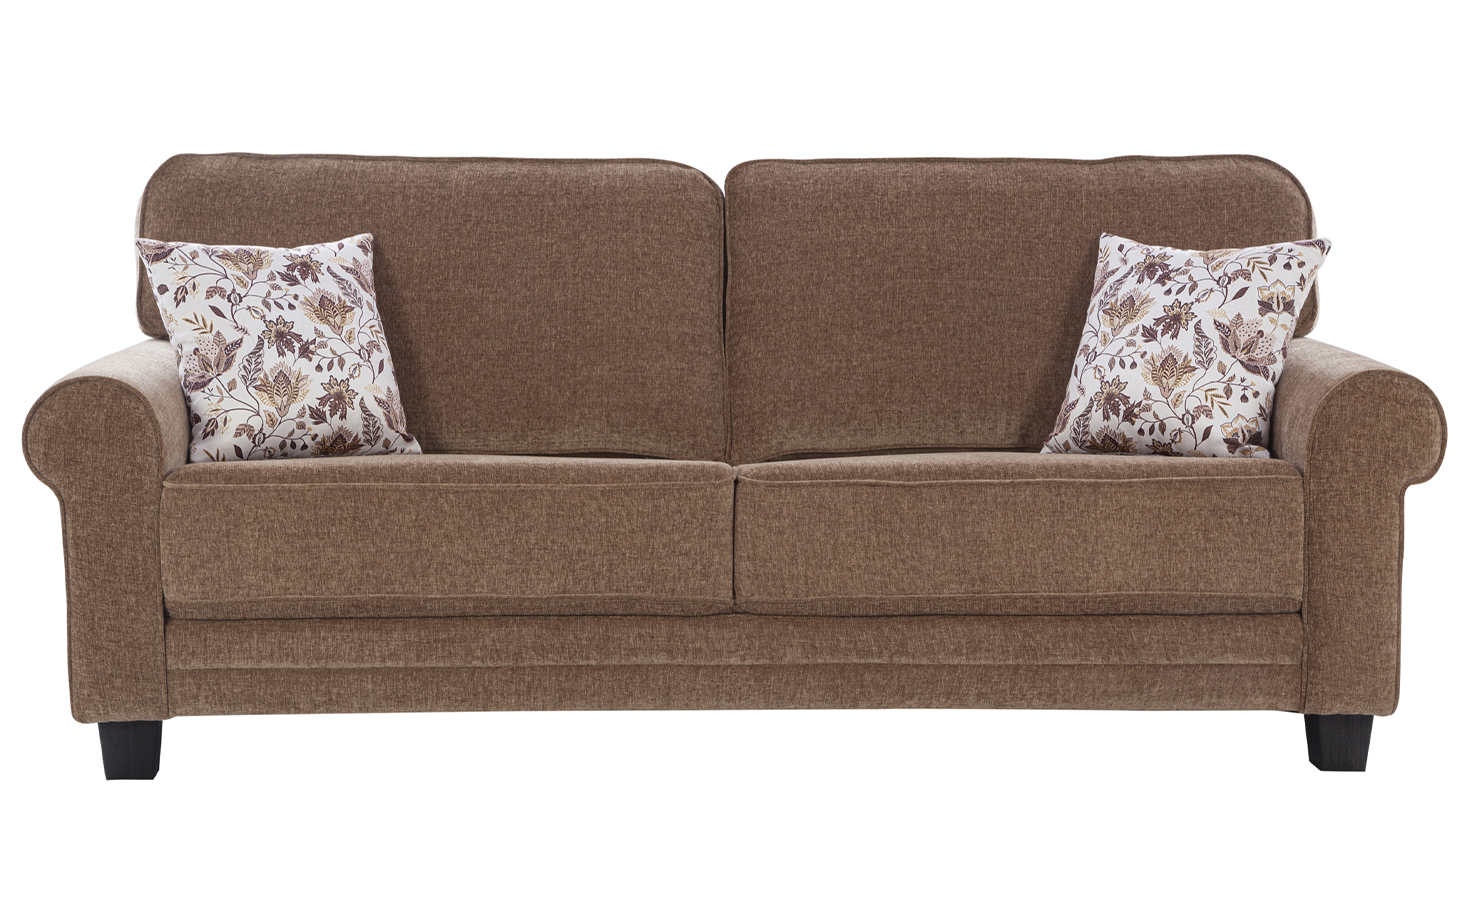 Clarksdale Fabric Sofa 6 Seater - Brown